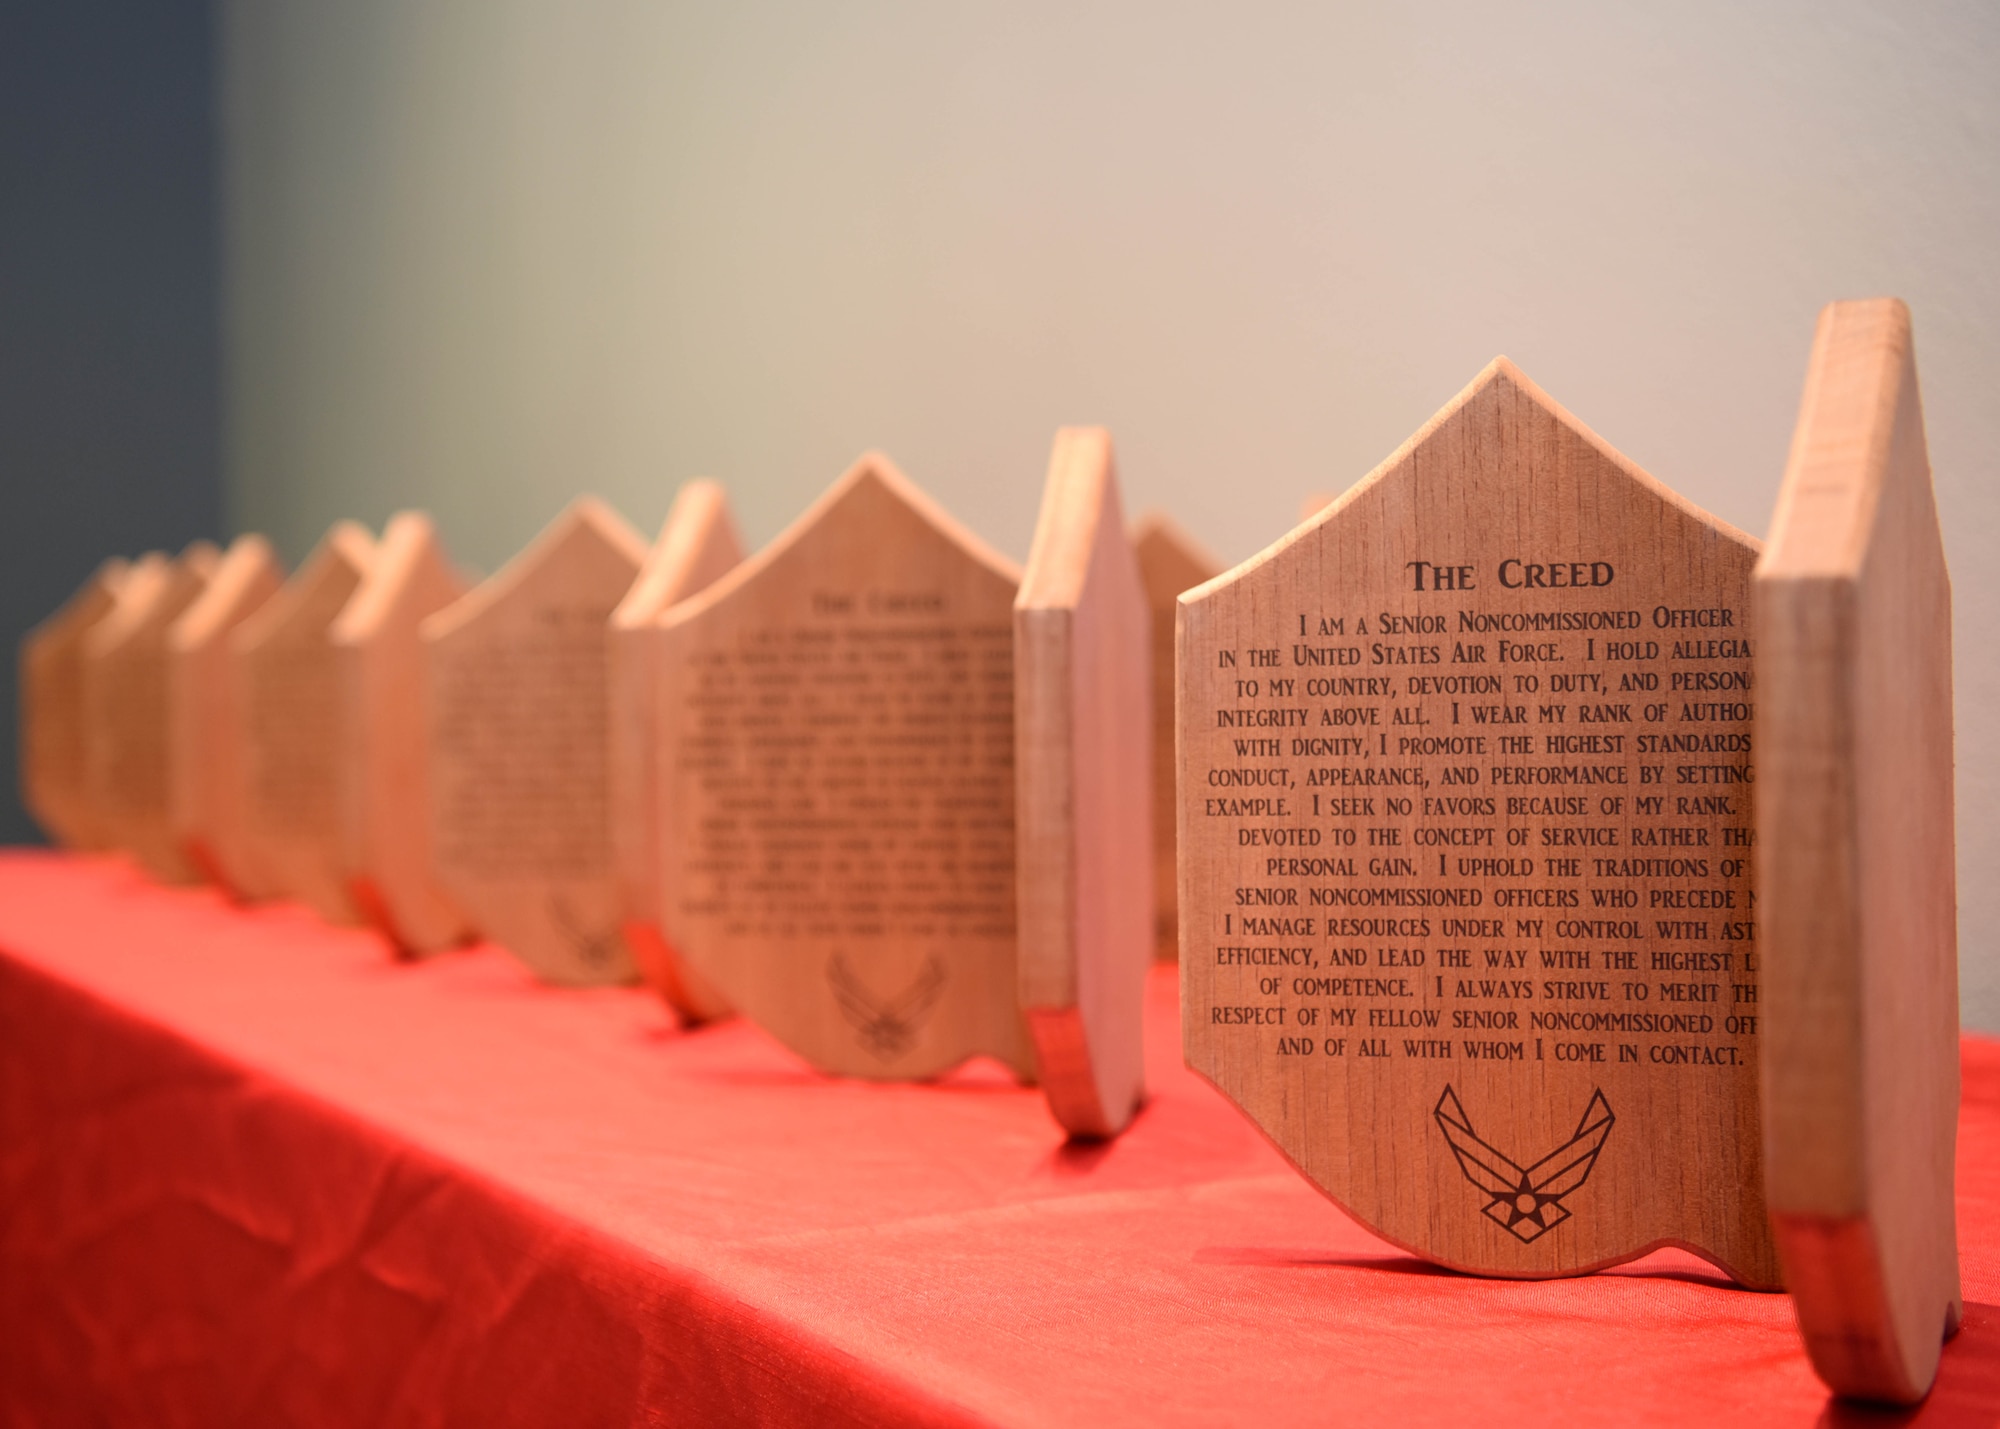 Plaques sit on a table displaying the senior noncommissioned officer creed during the SNCO Induction Ceremony at the event center on Goodfellow Air Force Base, Texas, Aug. 27, 2020. The SNCO inductees vowed to uphold the creed during the induction ceremony. (U.S. Air Force photo by Airman 1st Class Ethan Sherwood)